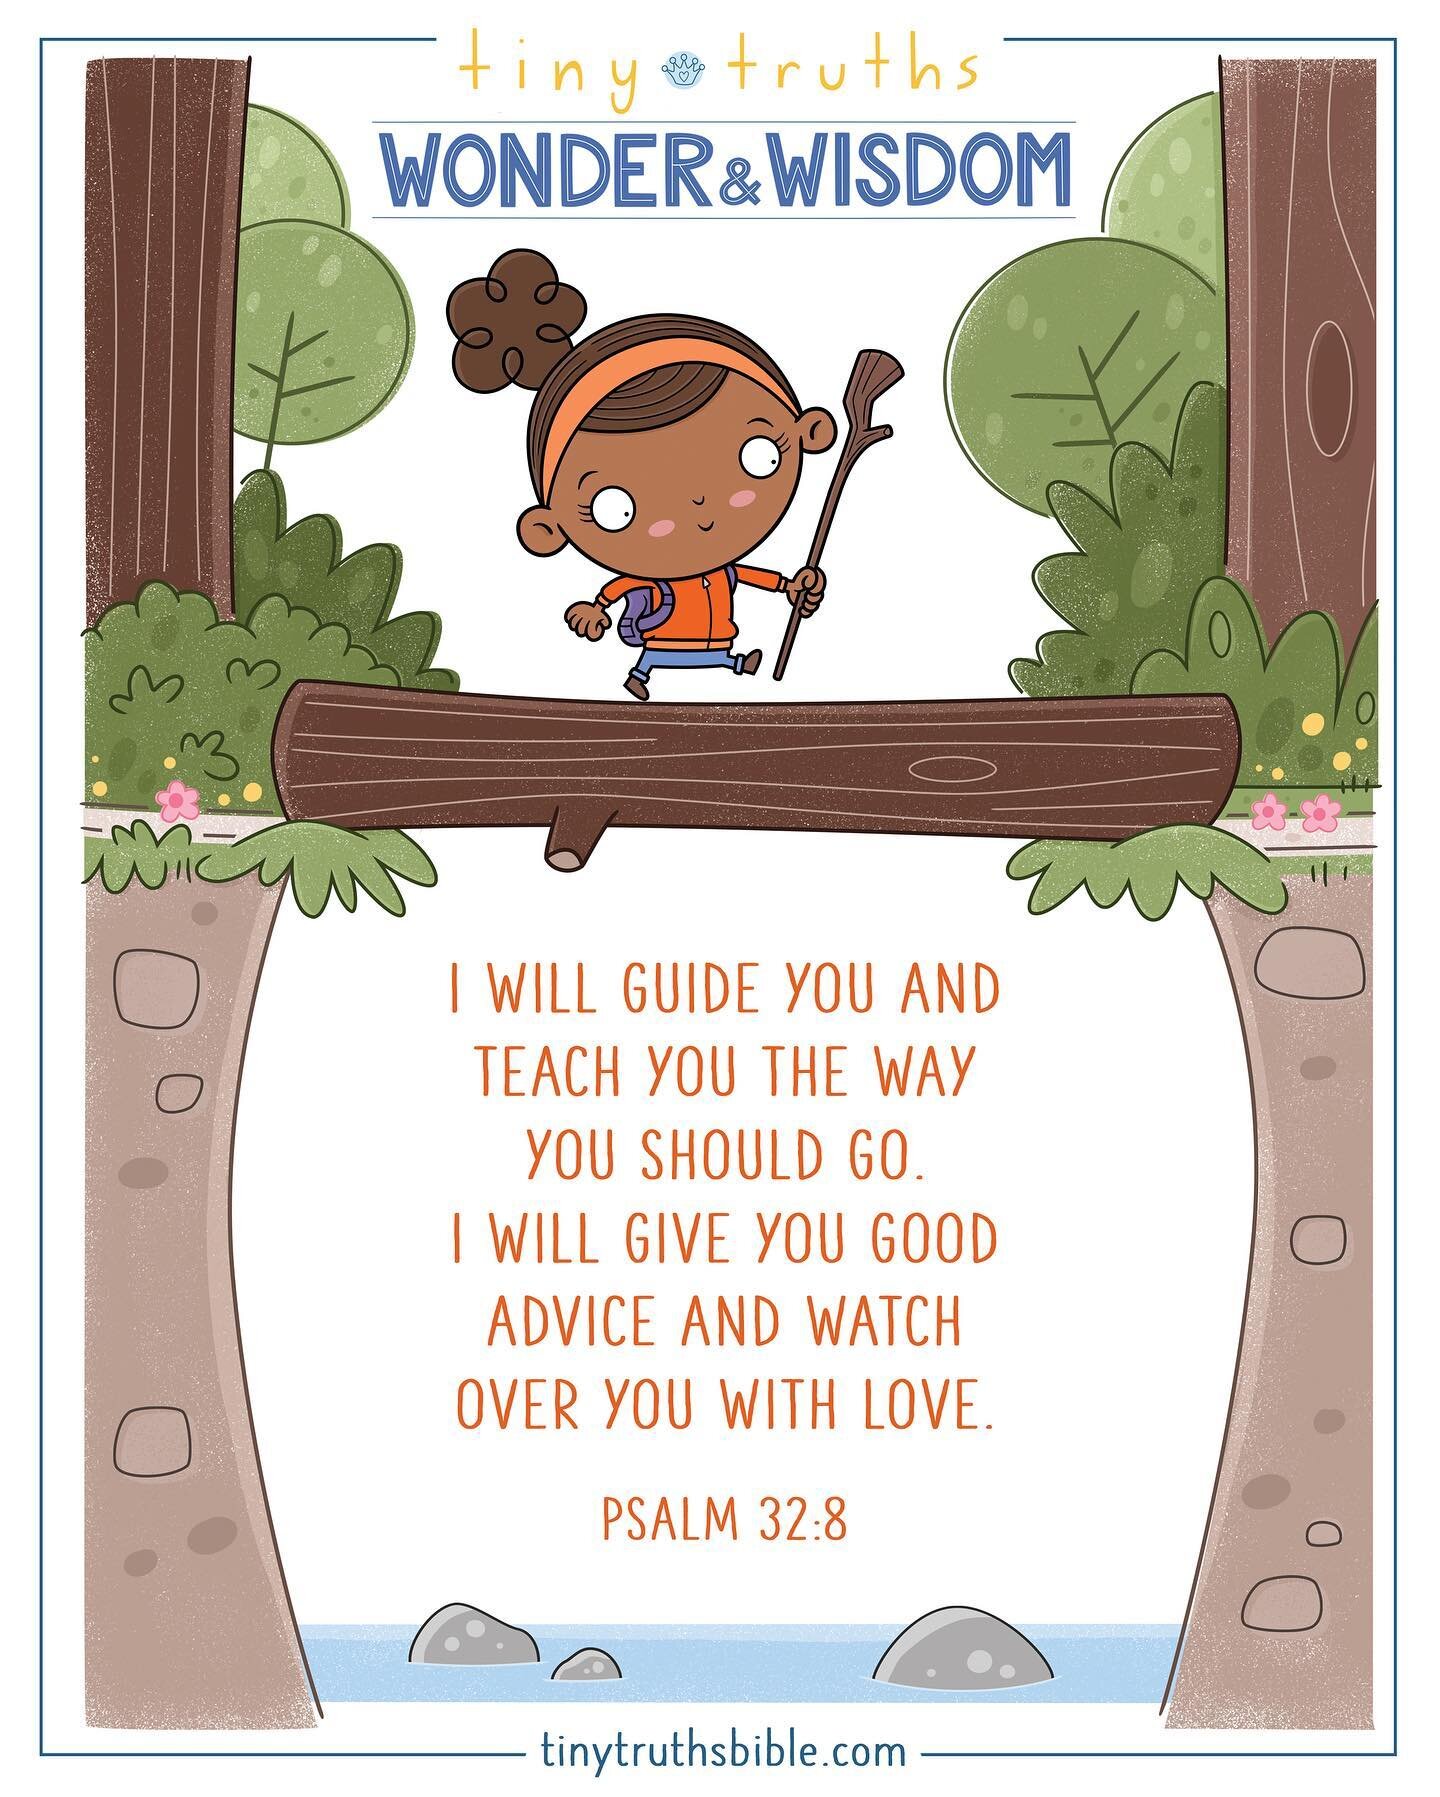 Tiny Truths: WONDER &amp; WISDOM  is a whole book of little lessons for kids (and reminders for adults) on how to live wisely and love well!

Each reading is based on a scripture from Psalms and Proverbs that teaches us how to be thankful, make good 